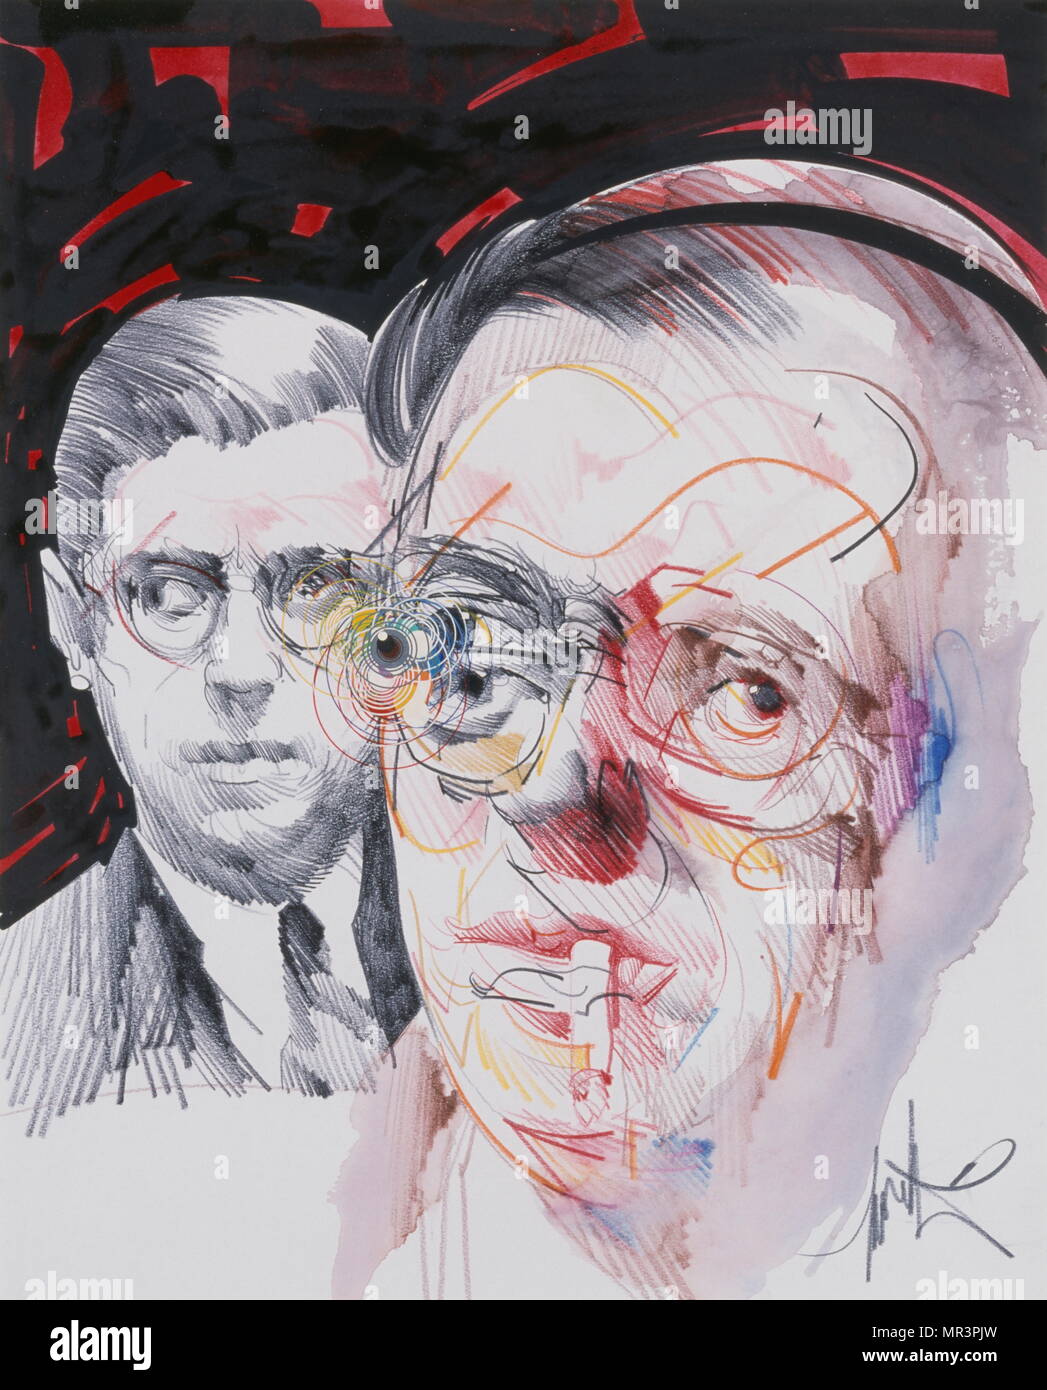 Jean-Paul Sartre (1905 – 1980), French philosopher, playwright, novelist, political activist. 1990 Portrait on a poster by Raymond Moretti (1931-2005), a French painter and sculptor. Stock Photo